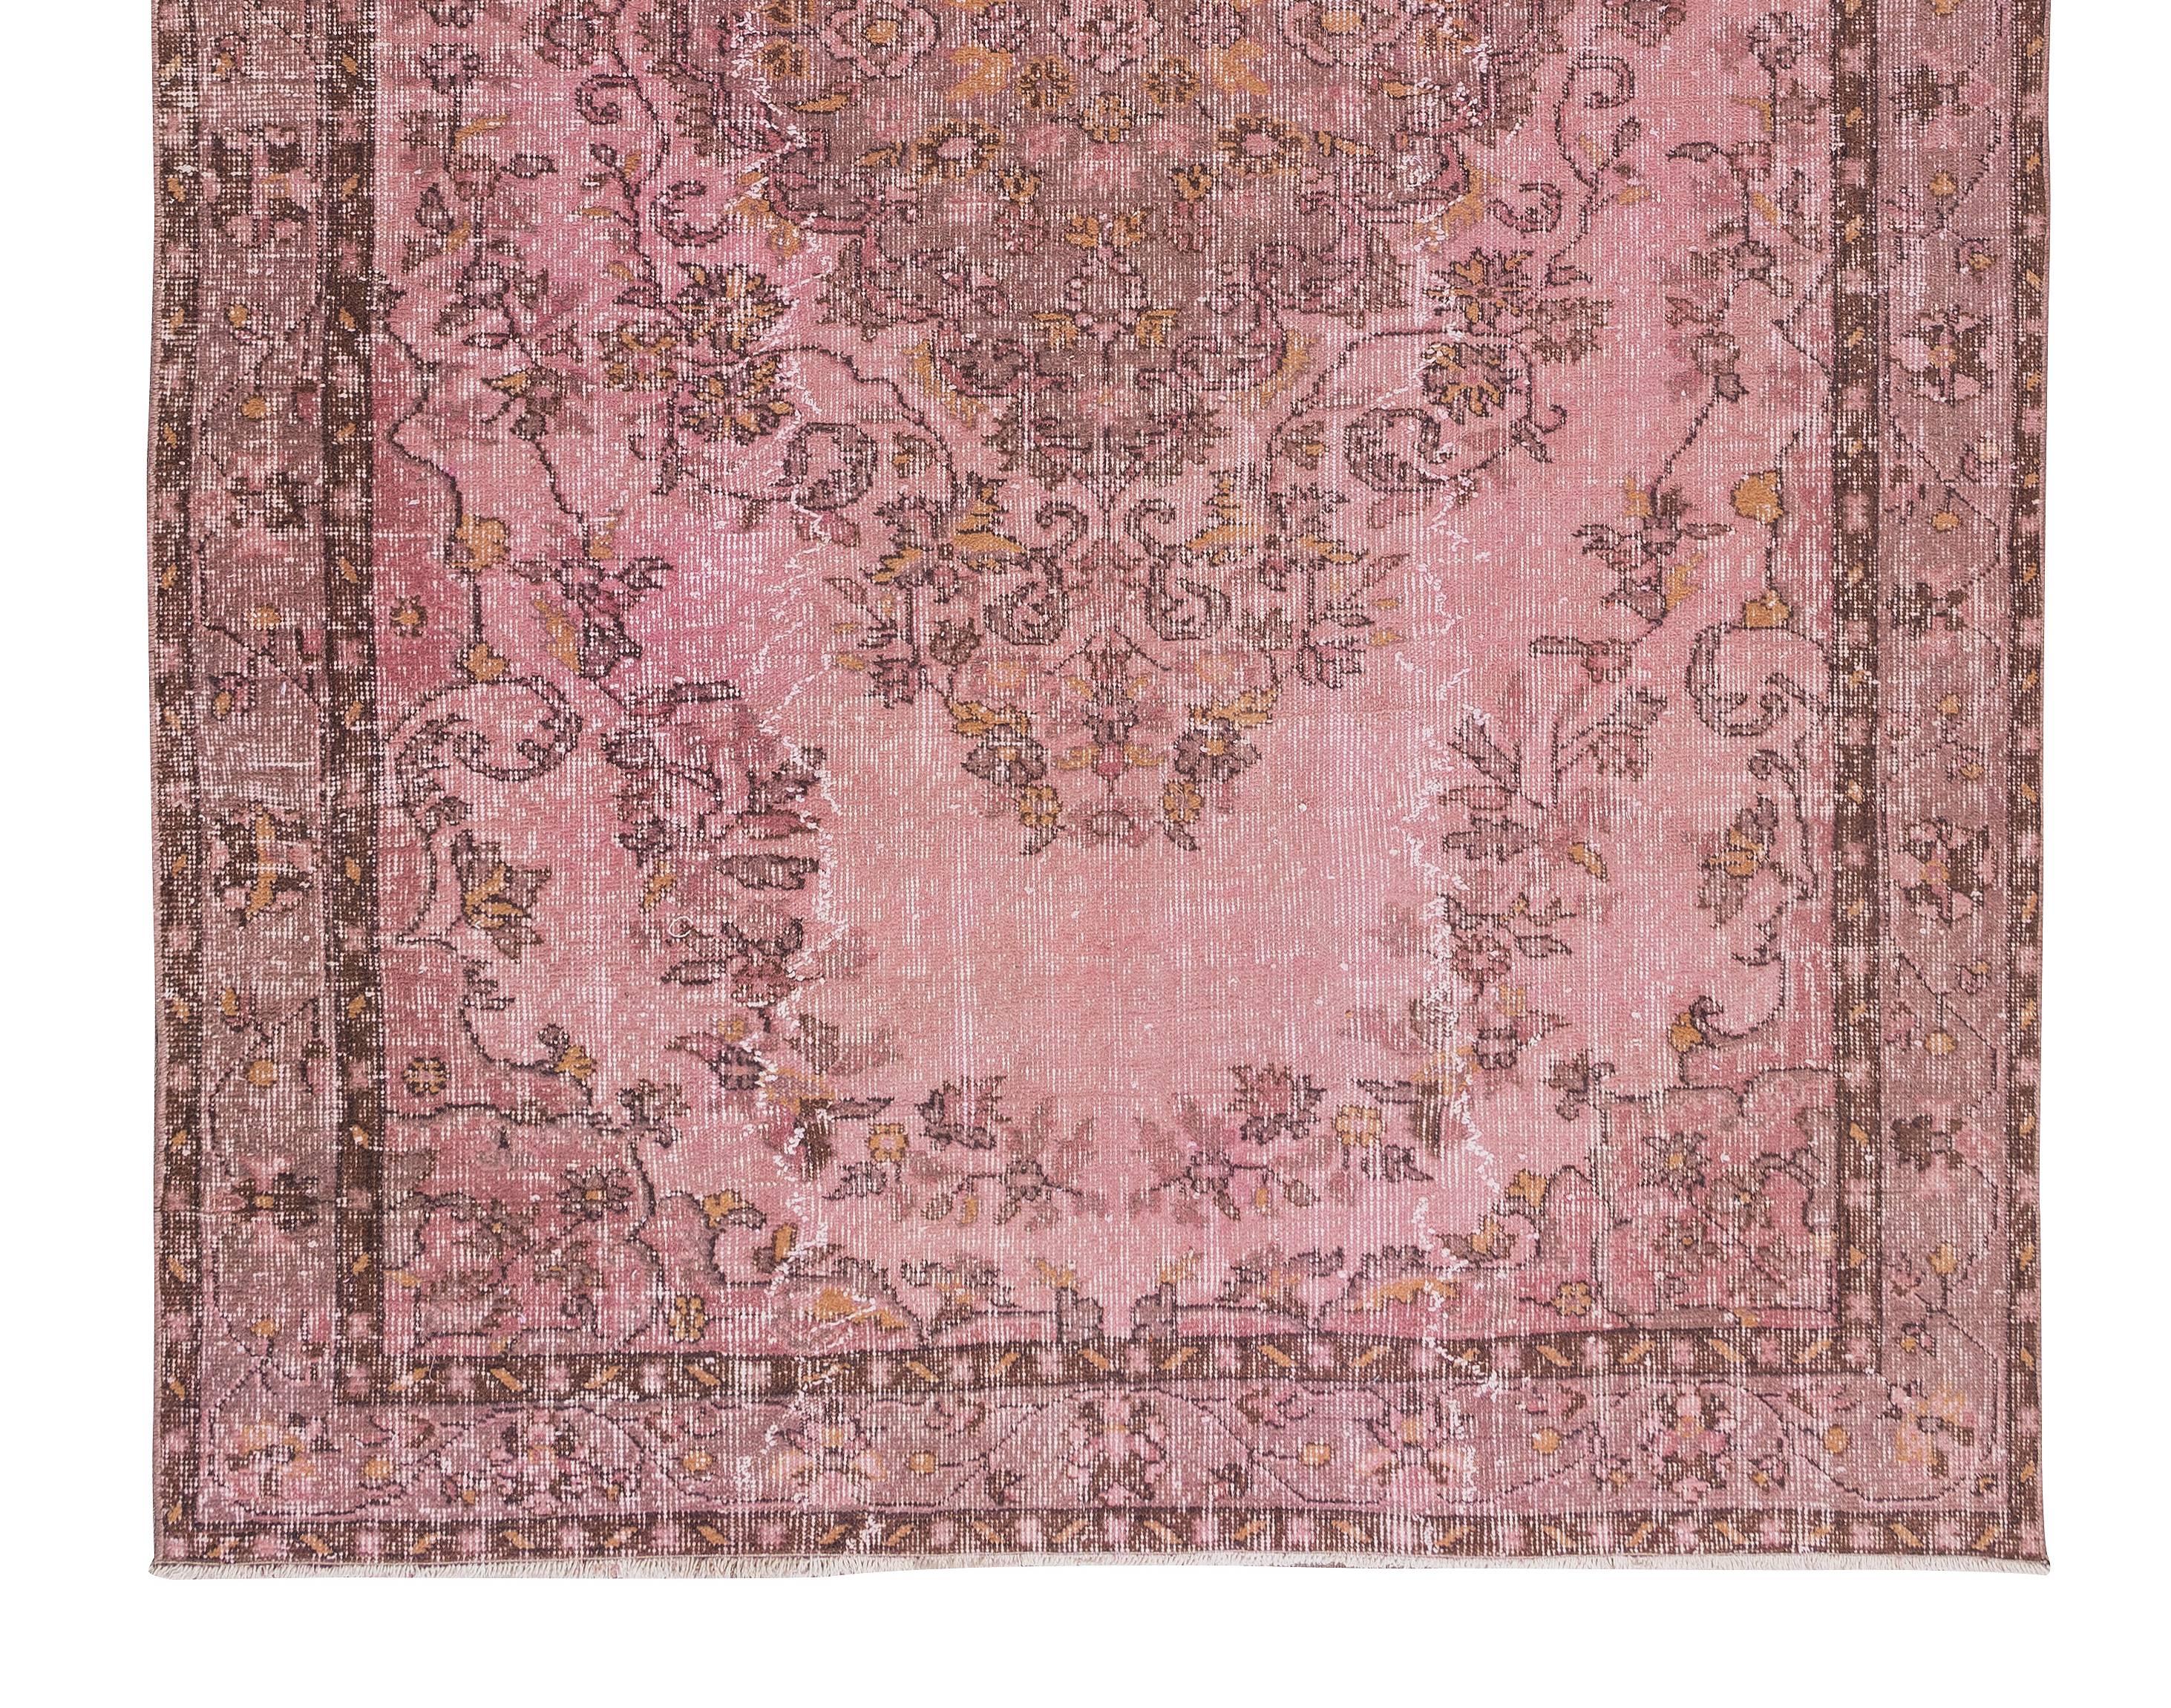 20th Century 6.2x10.2 Ft Handmade Turkish Vintage Rug Over-Dyed in Pink for Modern Interiors